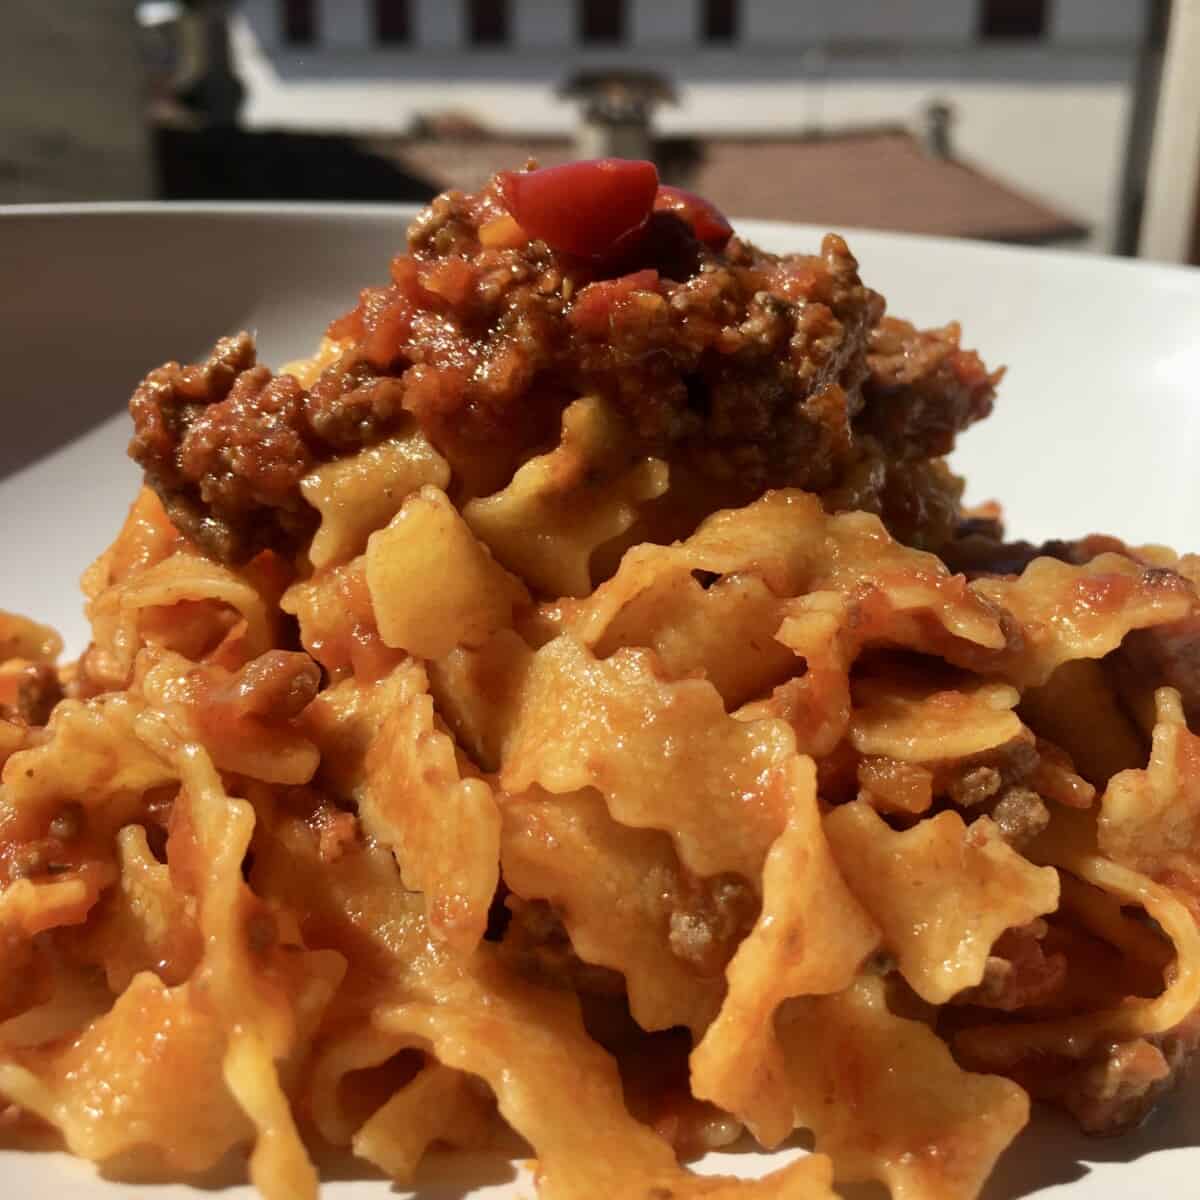 a bowl full of Reginelle tagliatelle pasta which is a tagliatelle egg pasta with zigzagged edges (with a beautiful beef ragù mixed in) with a view of the Italian homes and blue sky in the background